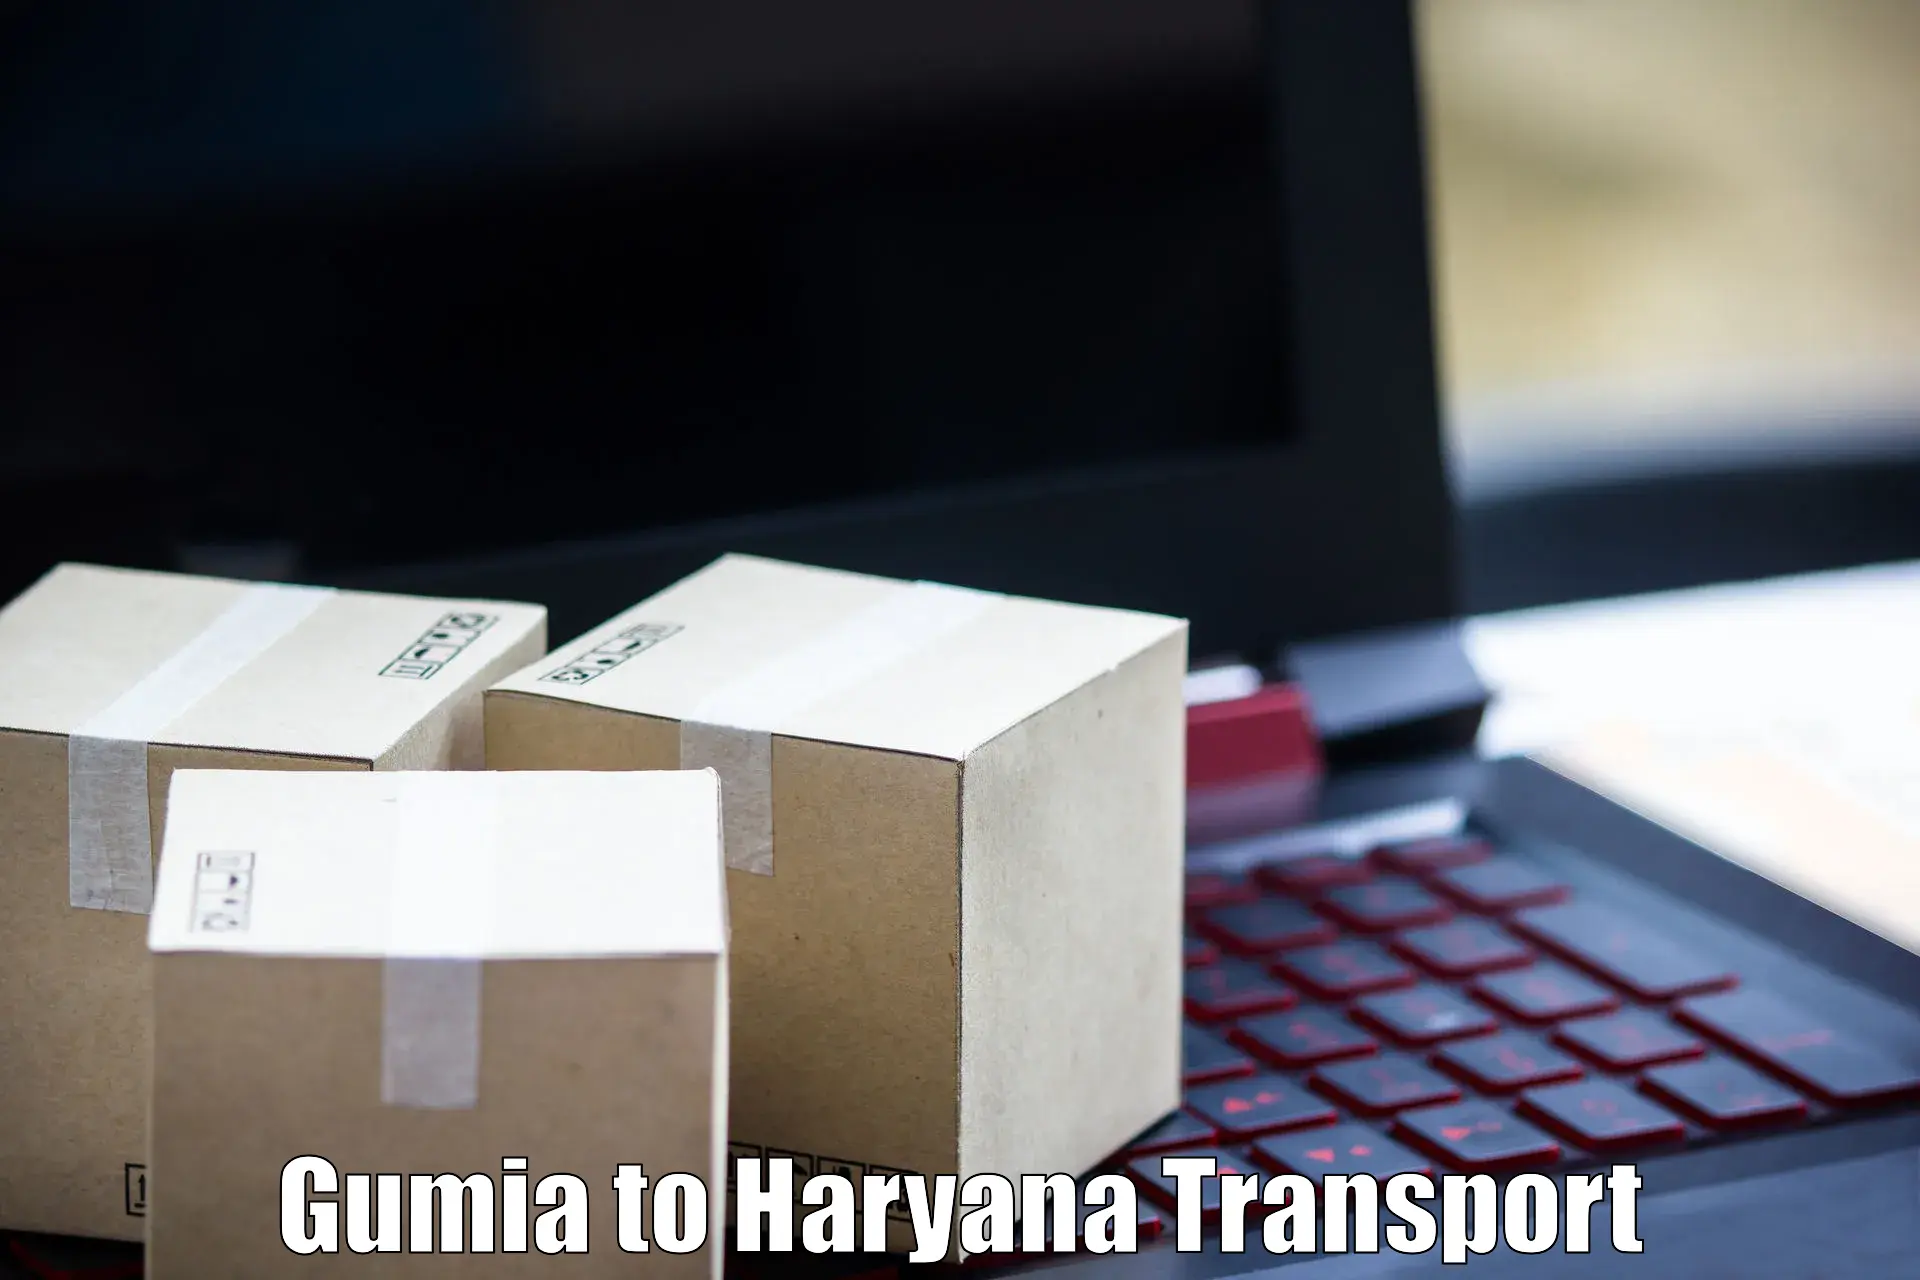 Air freight transport services Gumia to Haryana